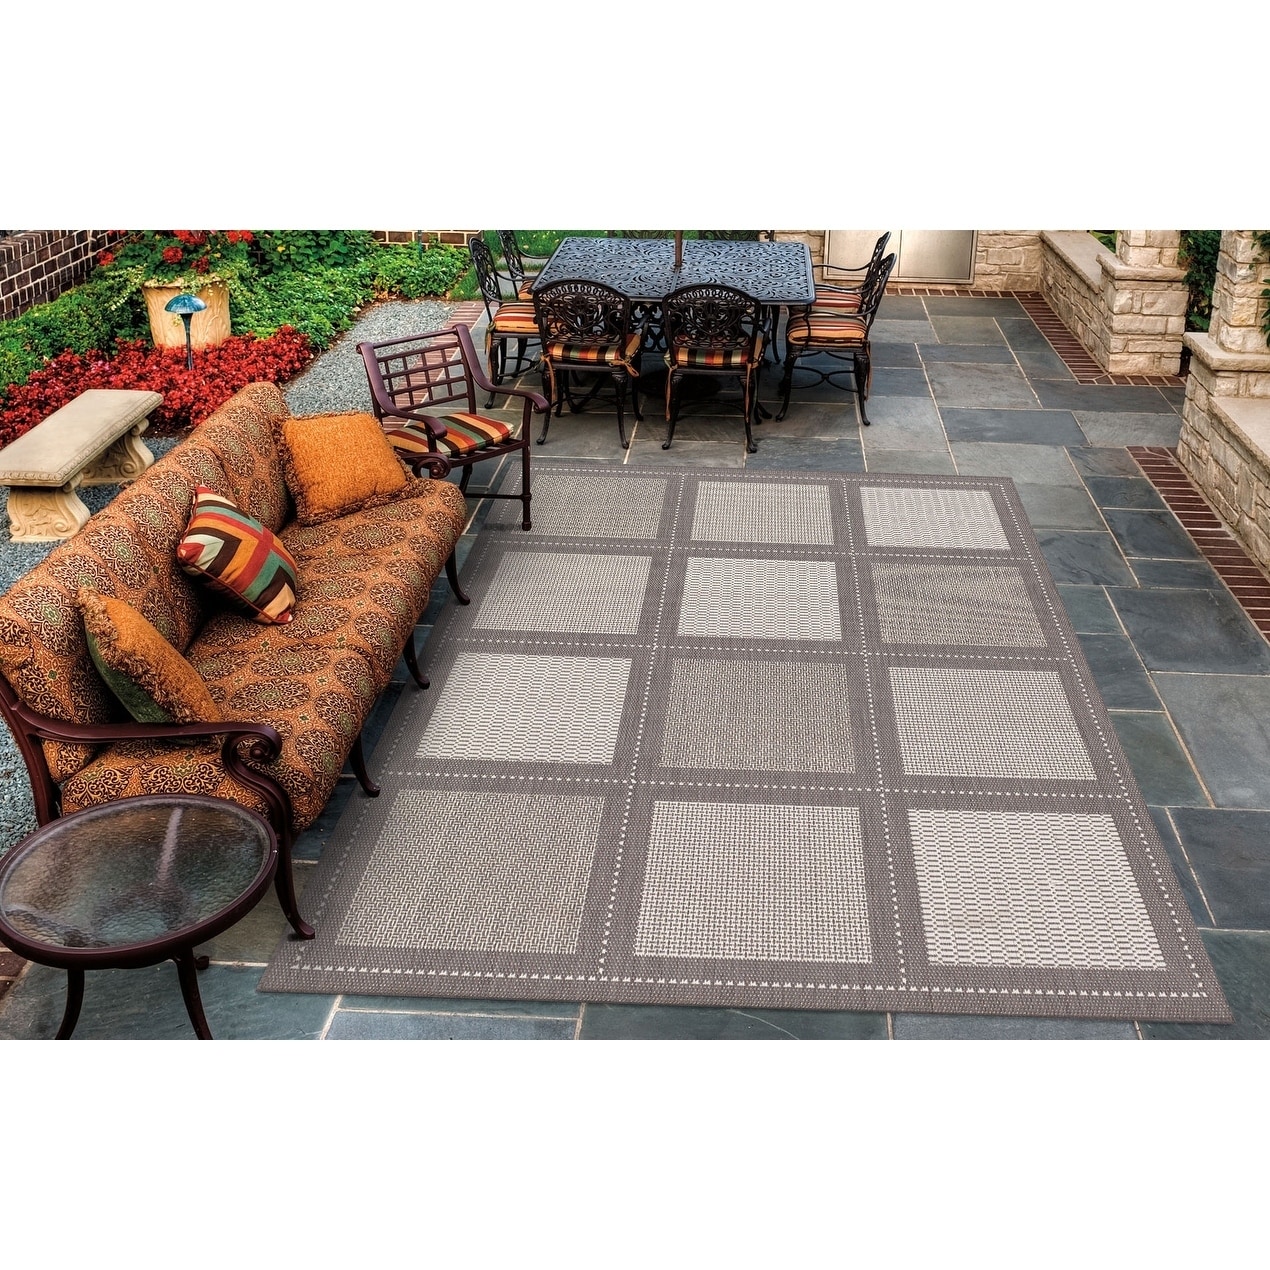 Recife Summit Grey and White Rug (76 x 109) Today $199.00